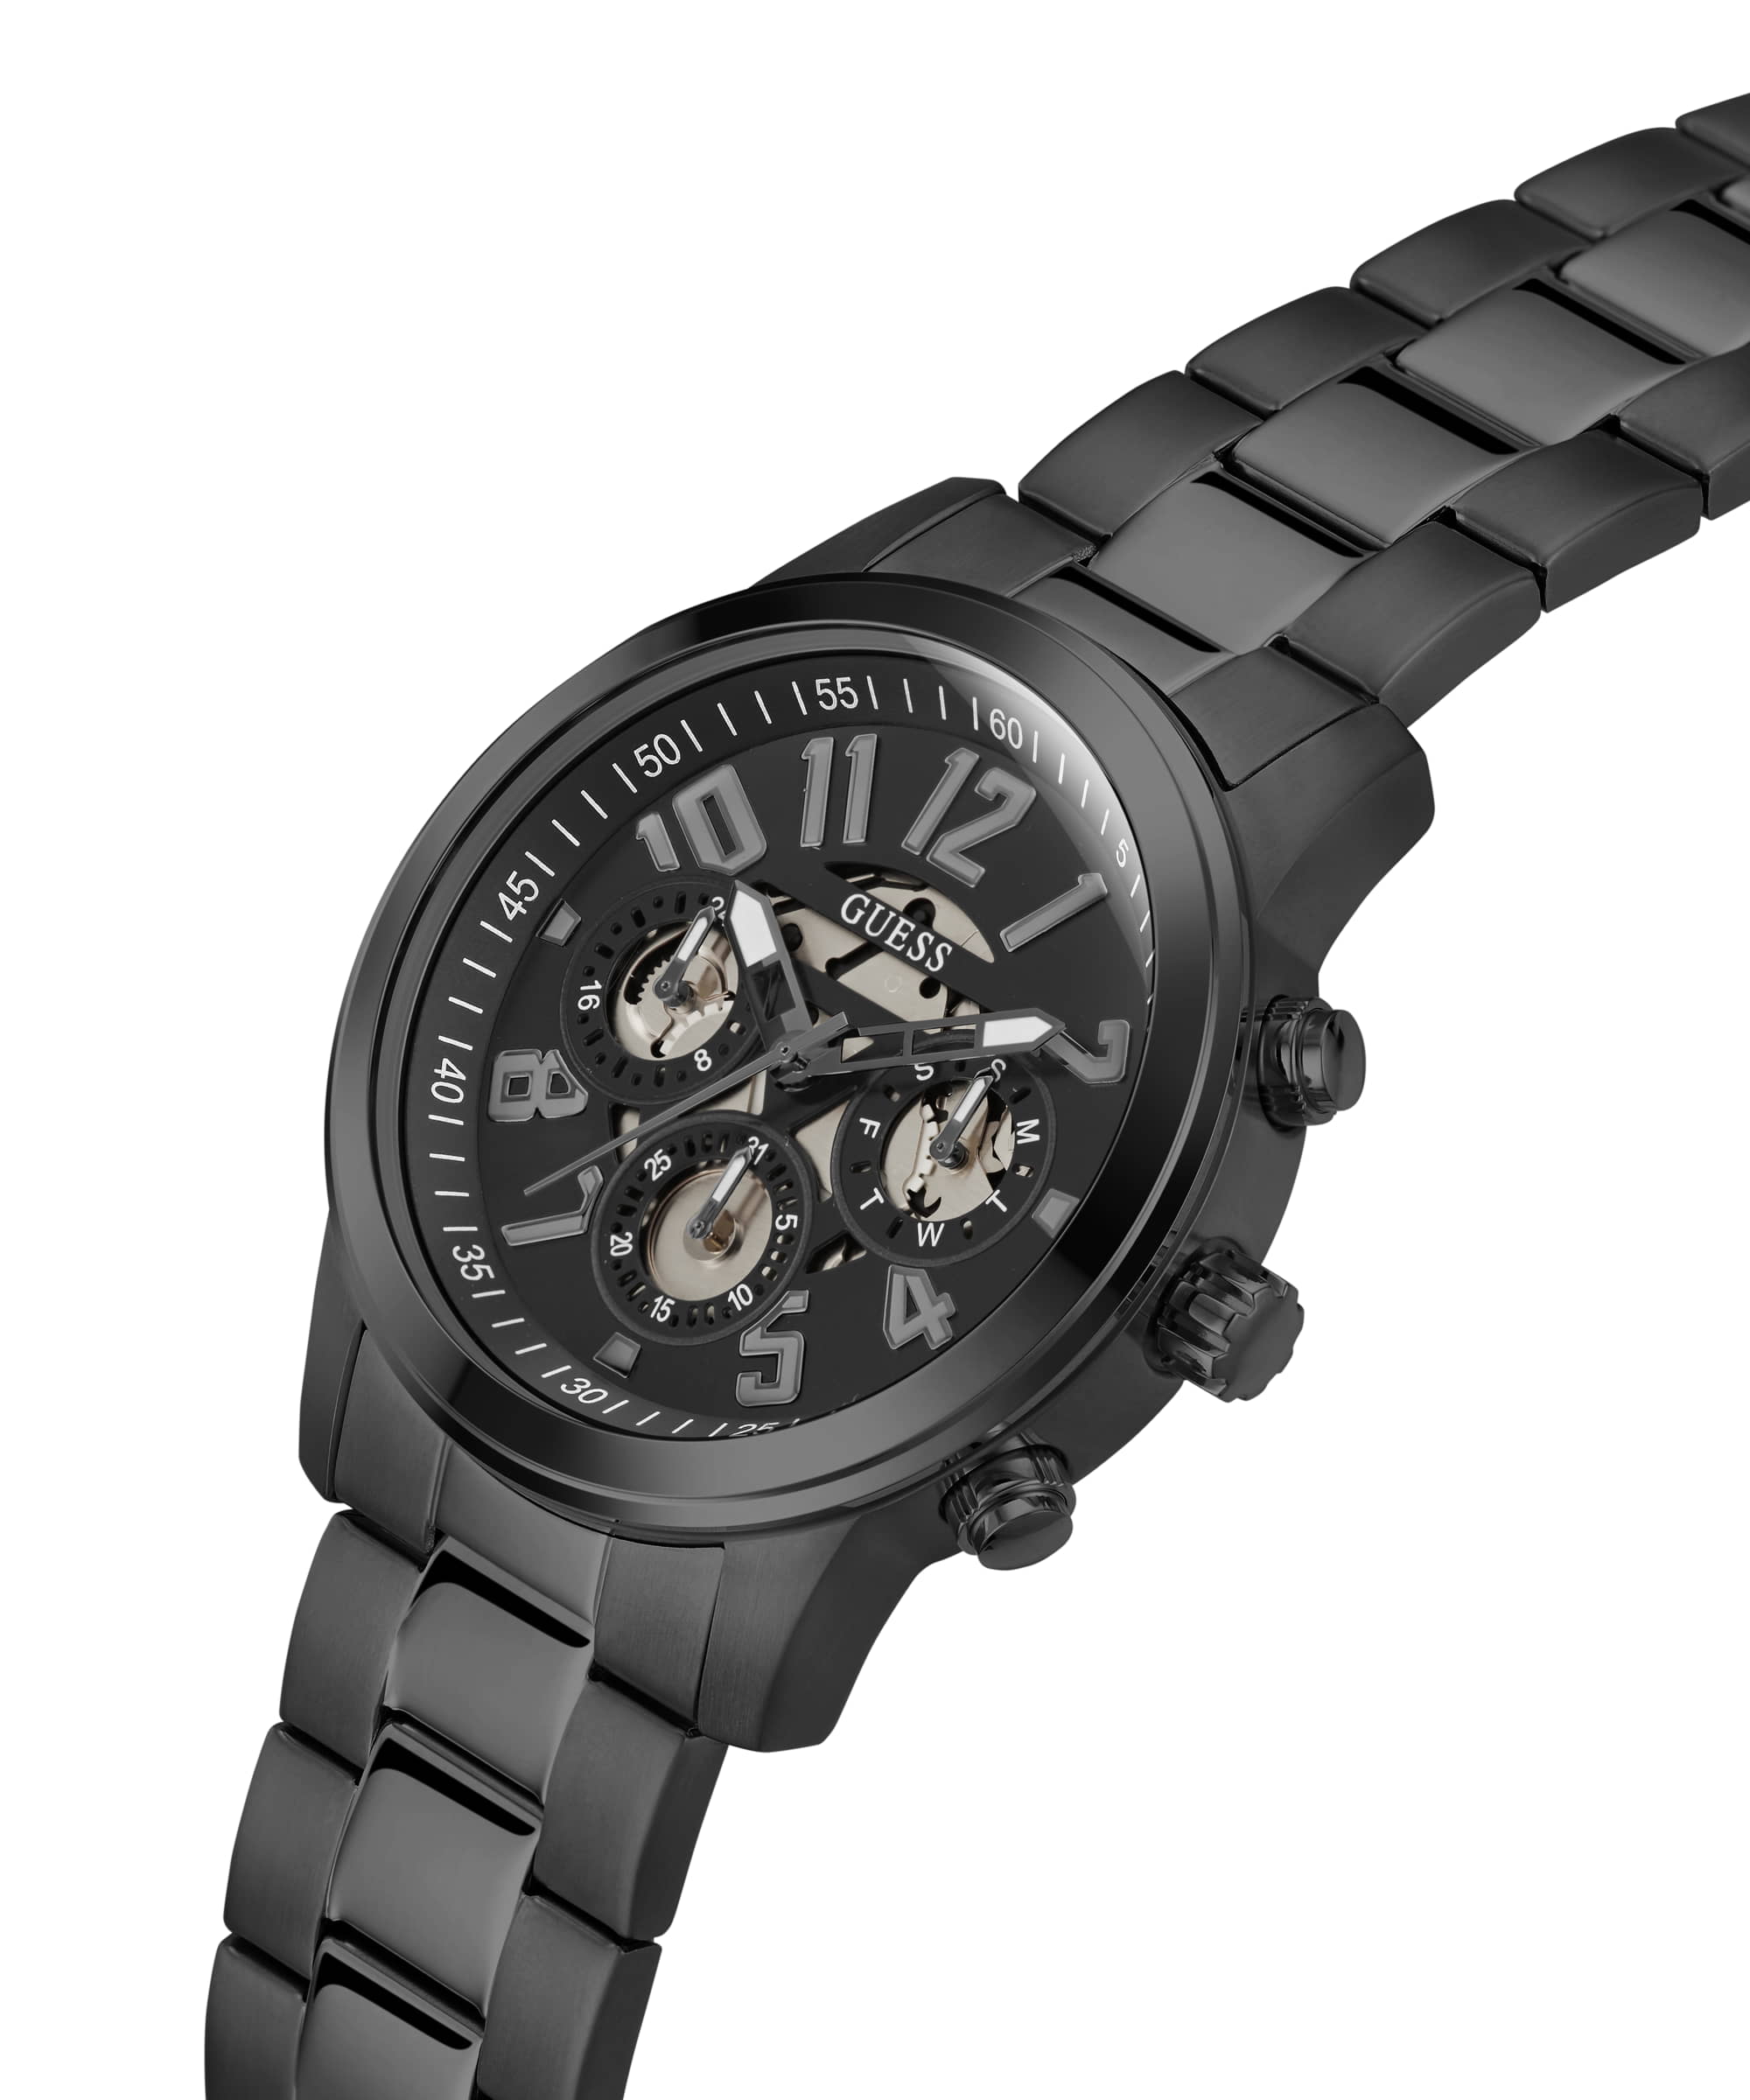 Black Dial - GW0487G Case Watches – Guess Multi-Function Watch Men Just Circuit Round